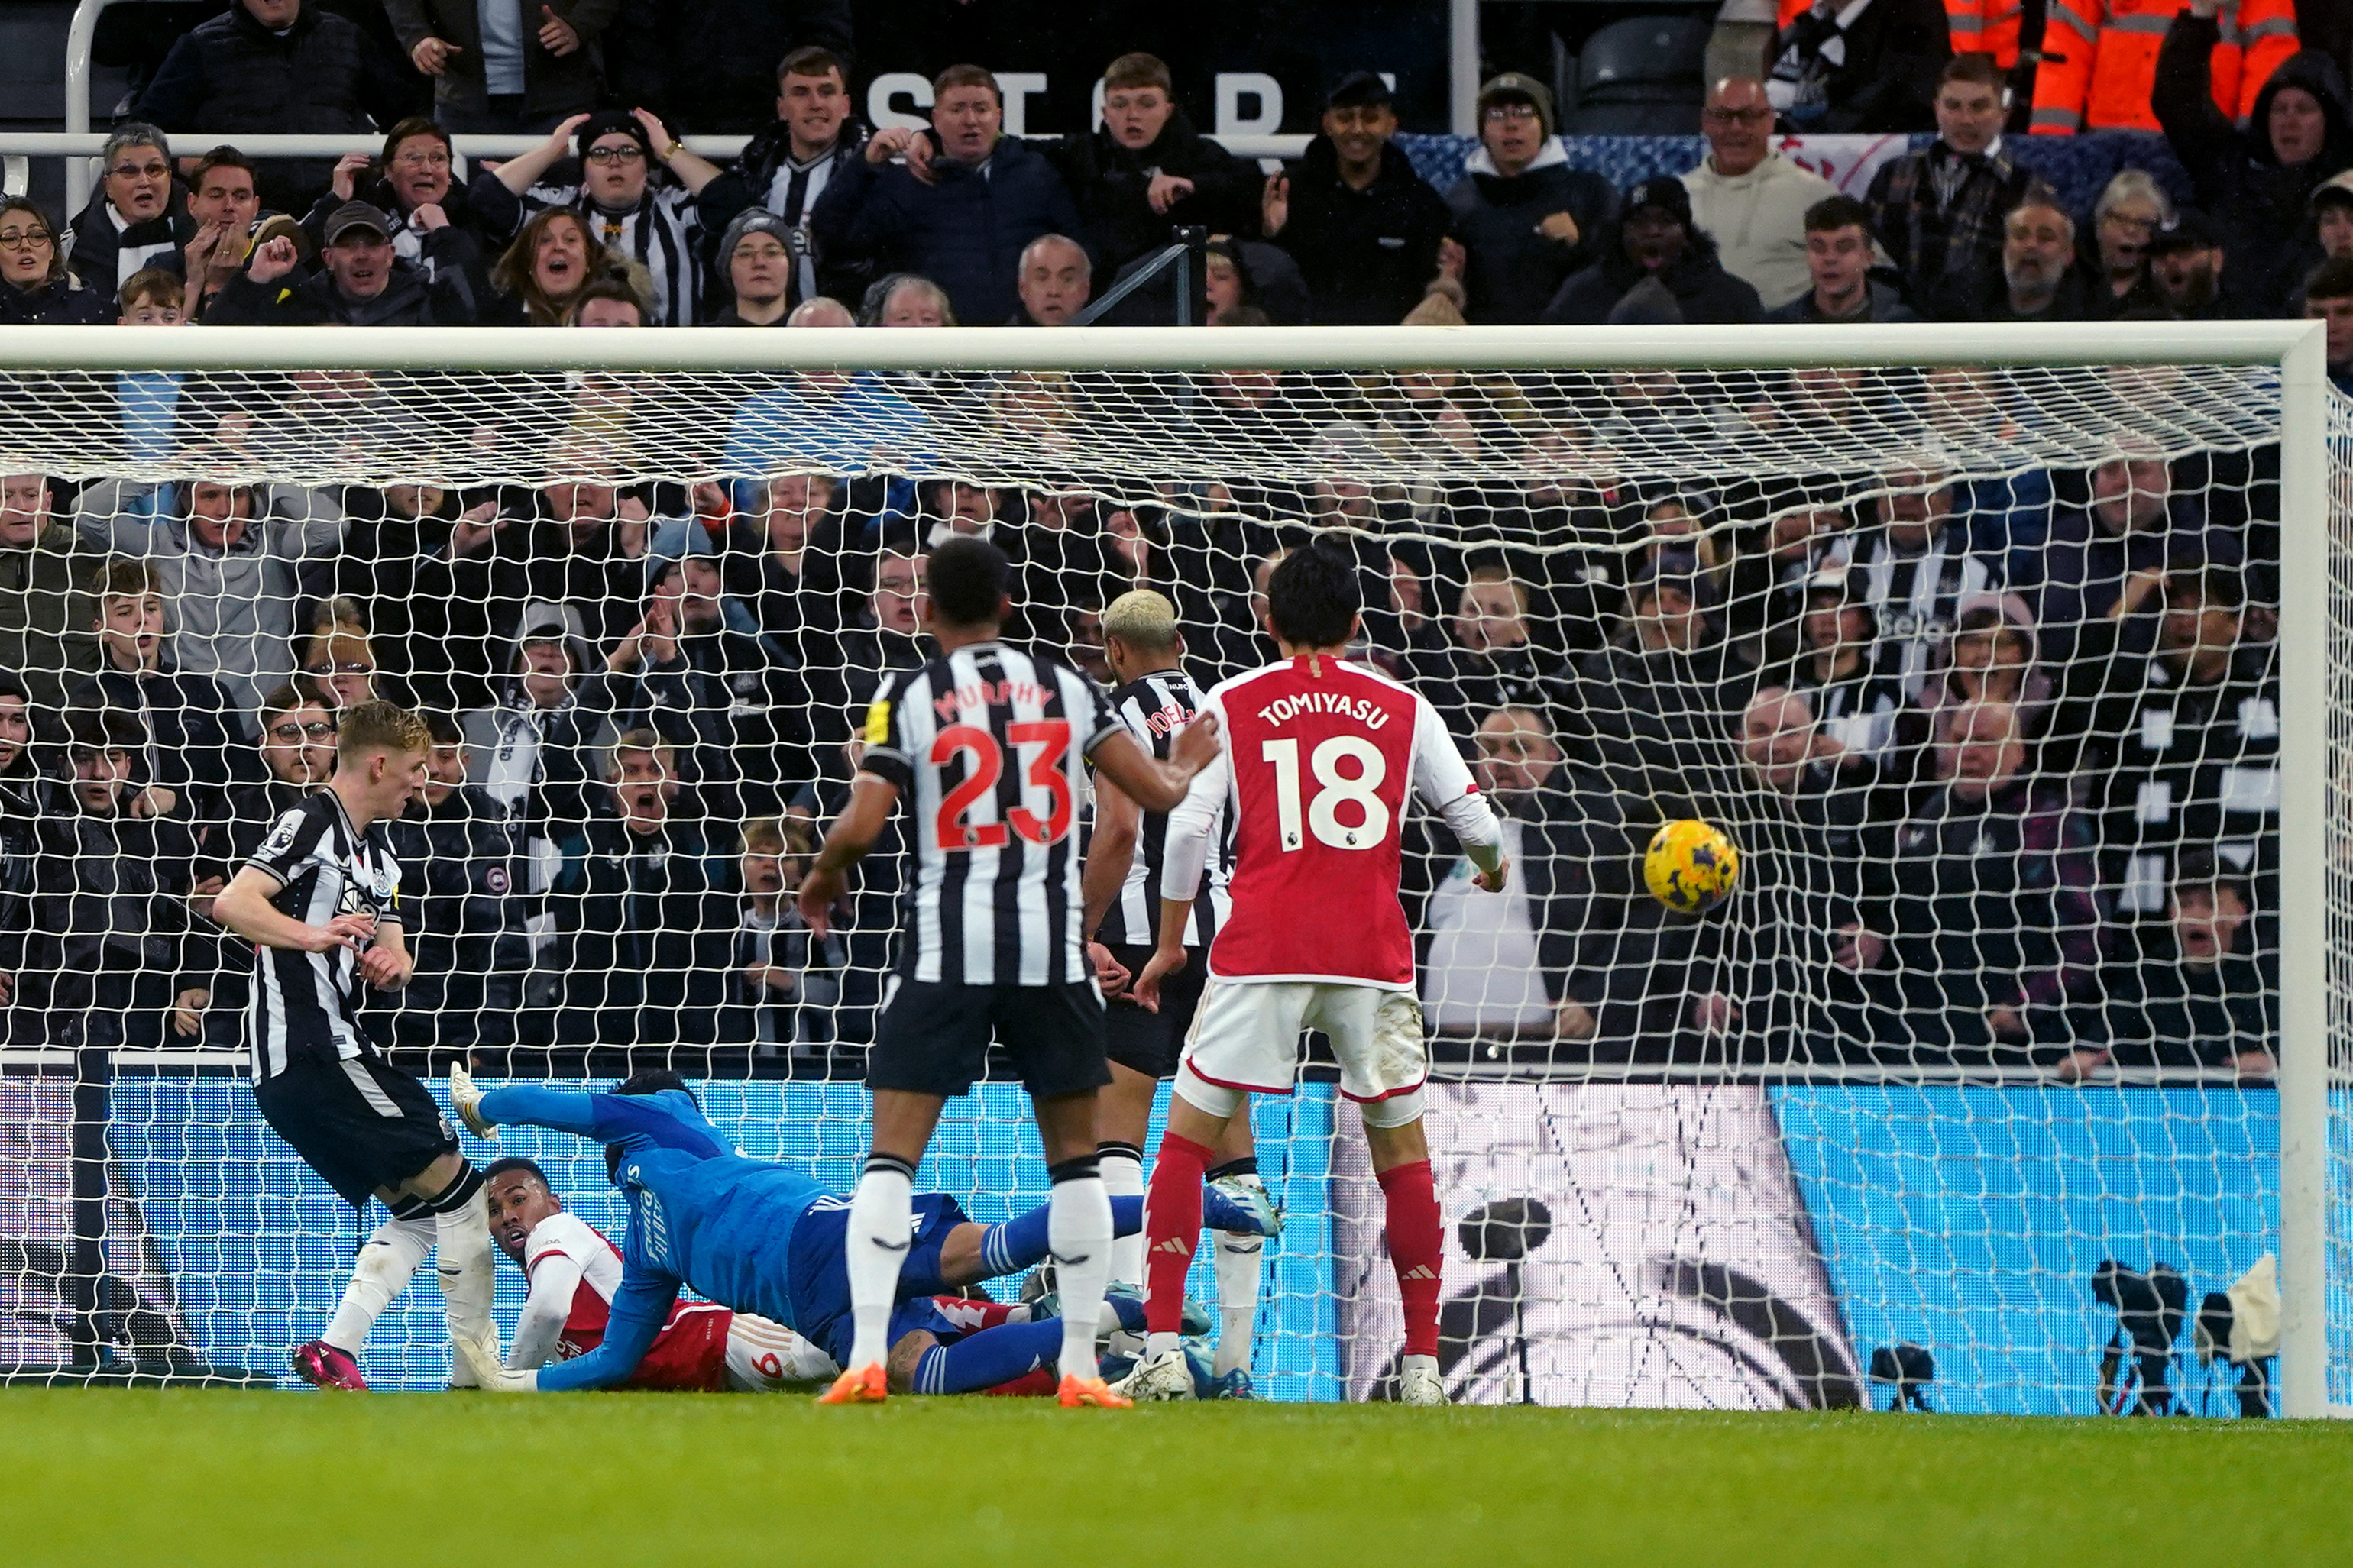 Anthony Gordon scored a controversial winner for Newcastle against Arsenal on Saturday